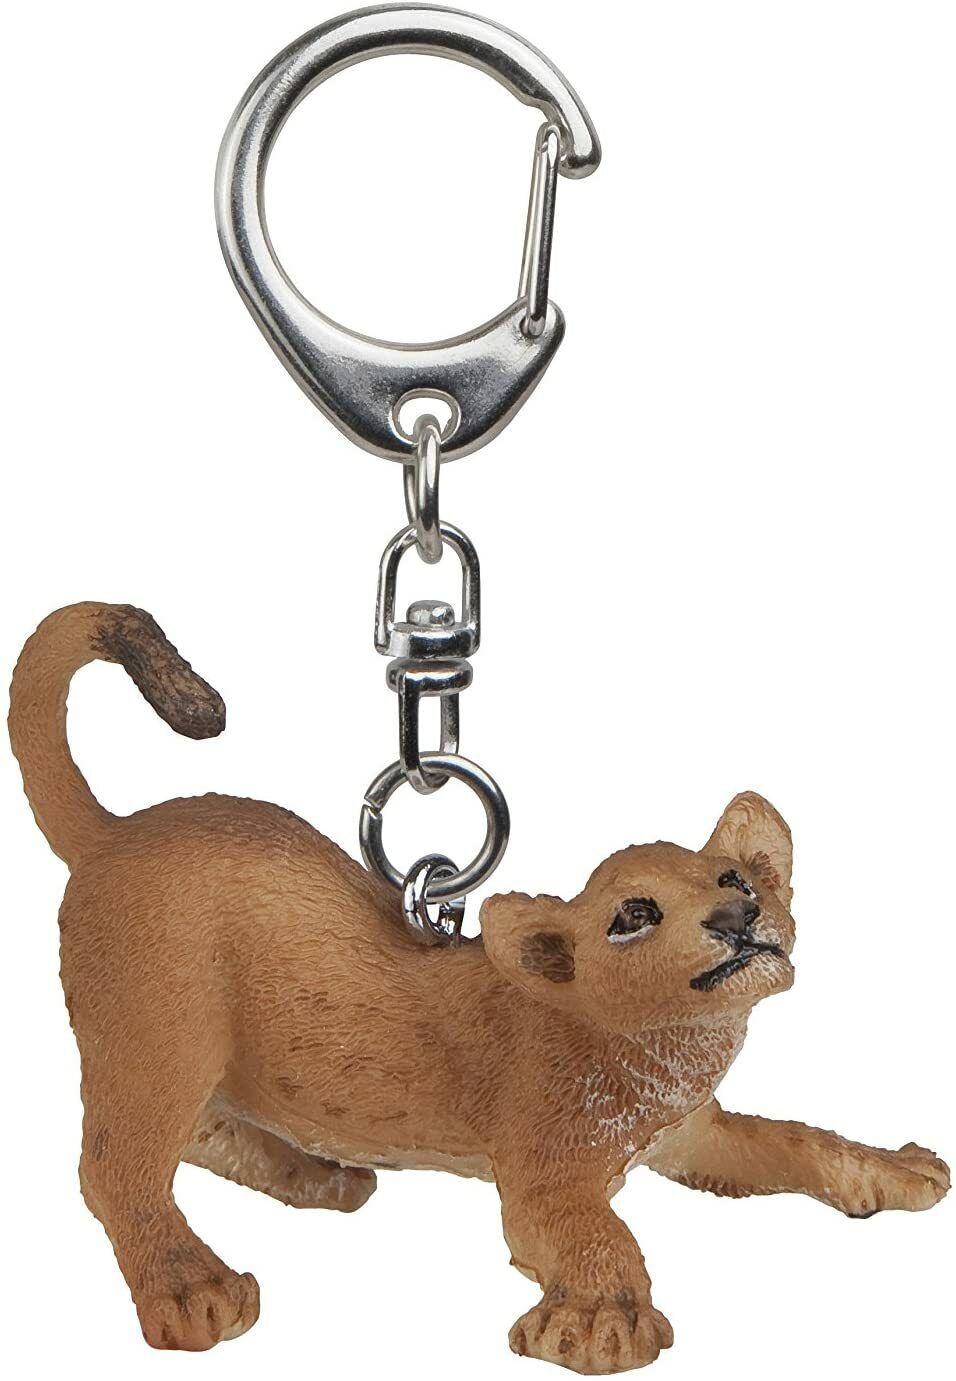 NEW PAPO 02203 Playing Young Lion Model Replica Keyring Key Ring